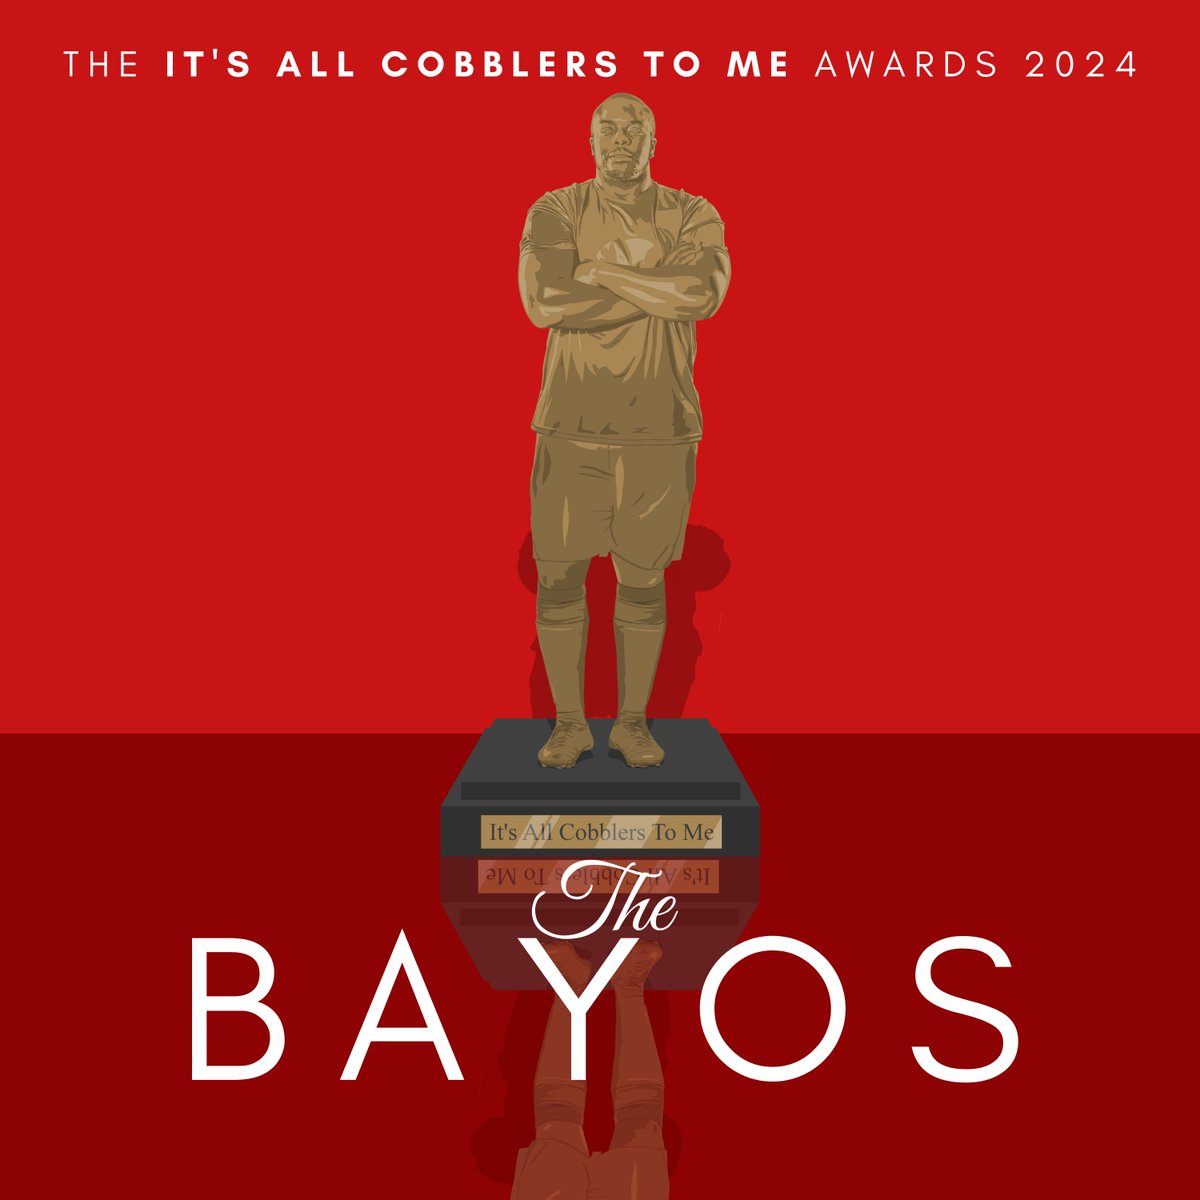 It's time for our annual awards show - The Bayos 2024! Time to find out who won all of our awards as we wrap up the season for The Cobblers. Who will win our awards for Signing, Goal, Opposition Fan and Player of the Season? Find out now on your podcast app of choice! #ntfc